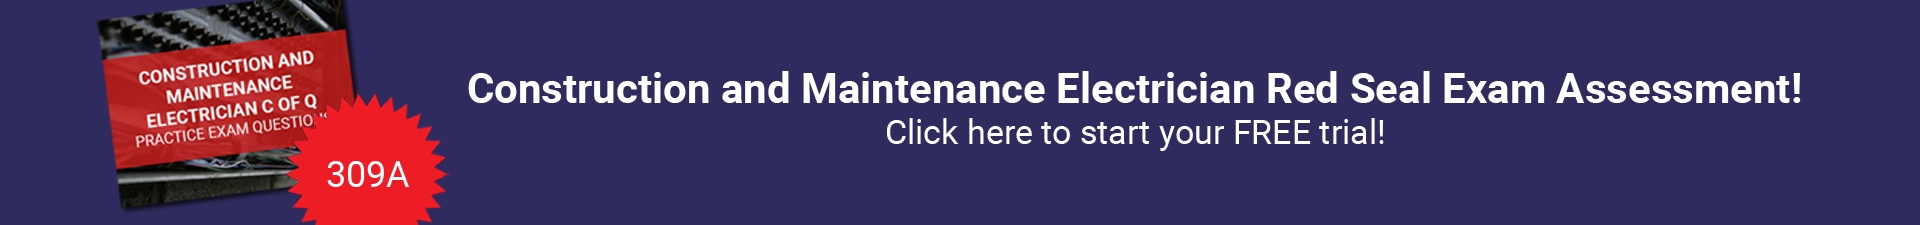 Construction and Maintenance Electrician (309A) Free Assessment